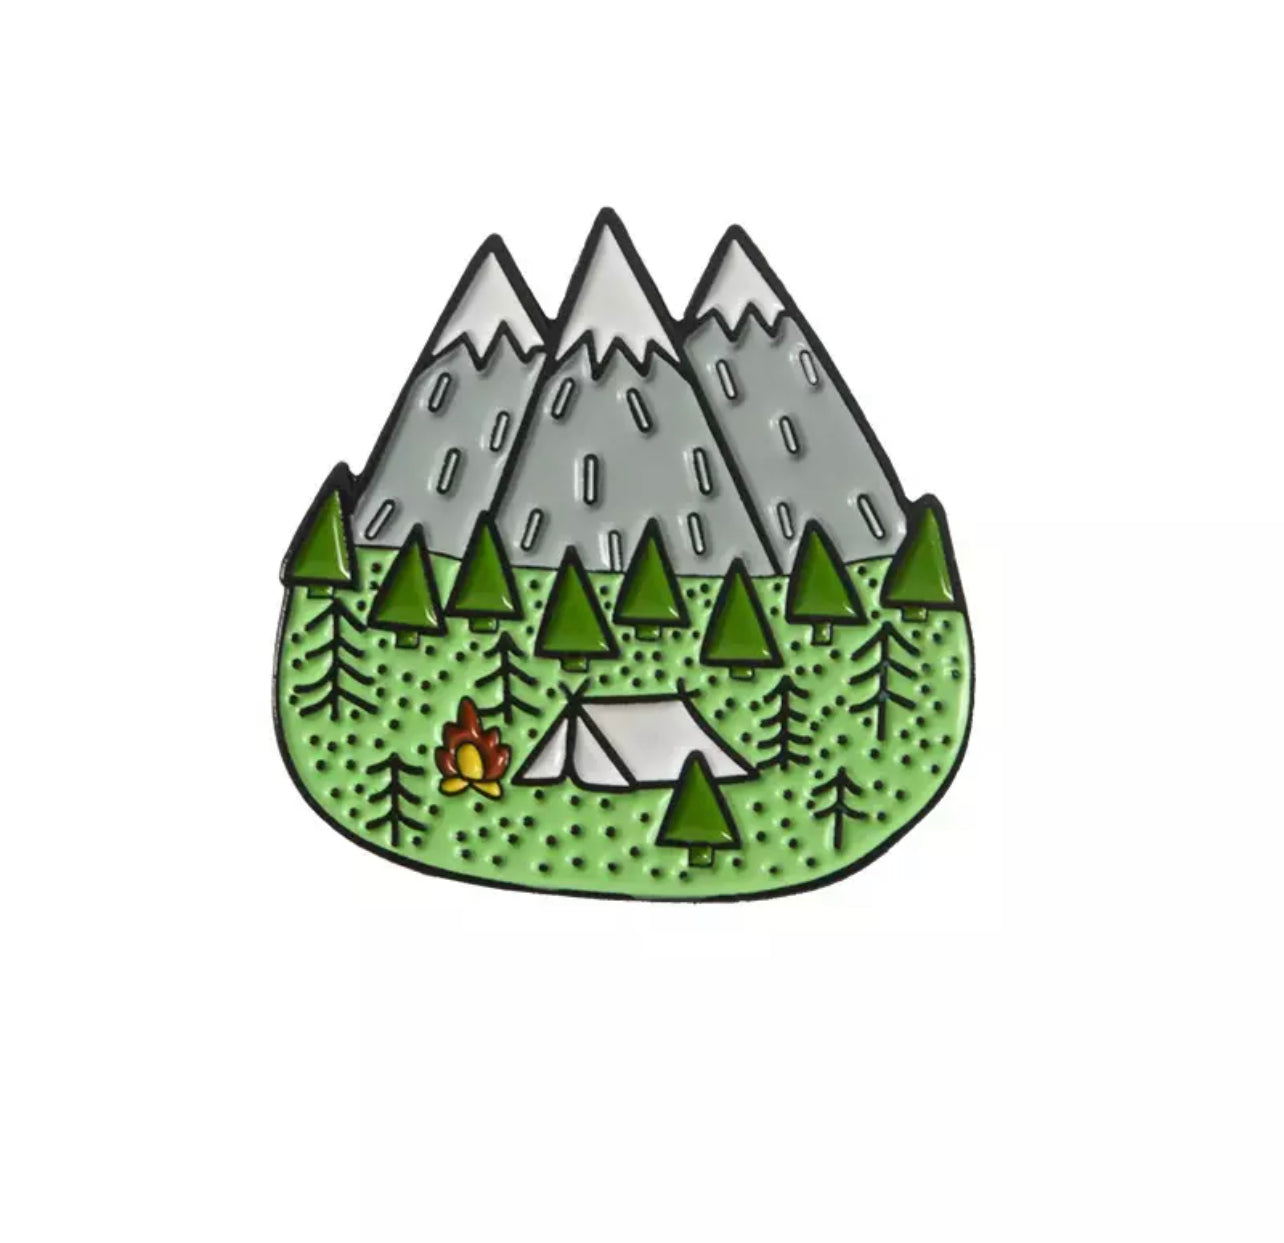 Mountains & tent